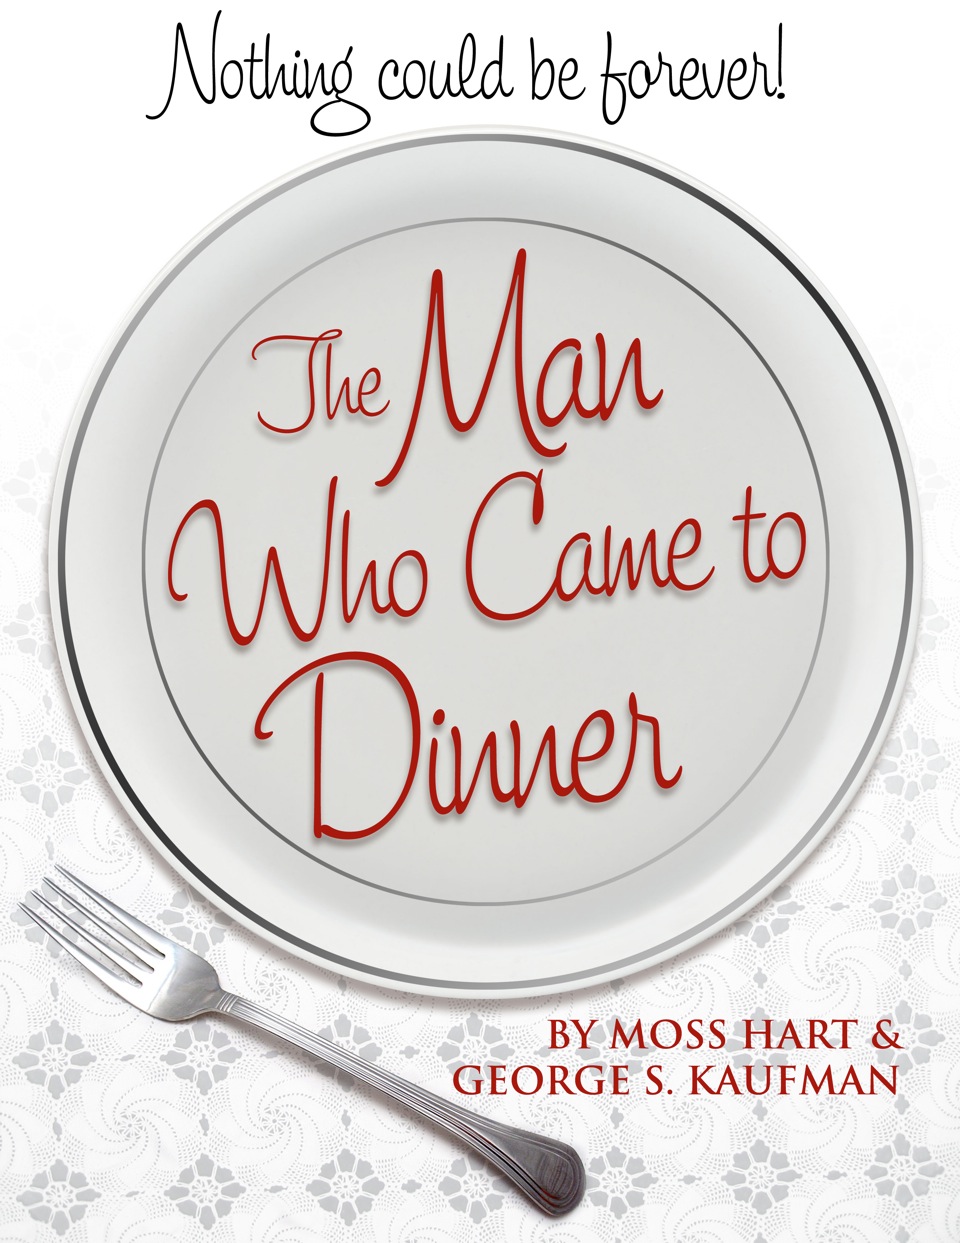 The Man Who Came To Dinner